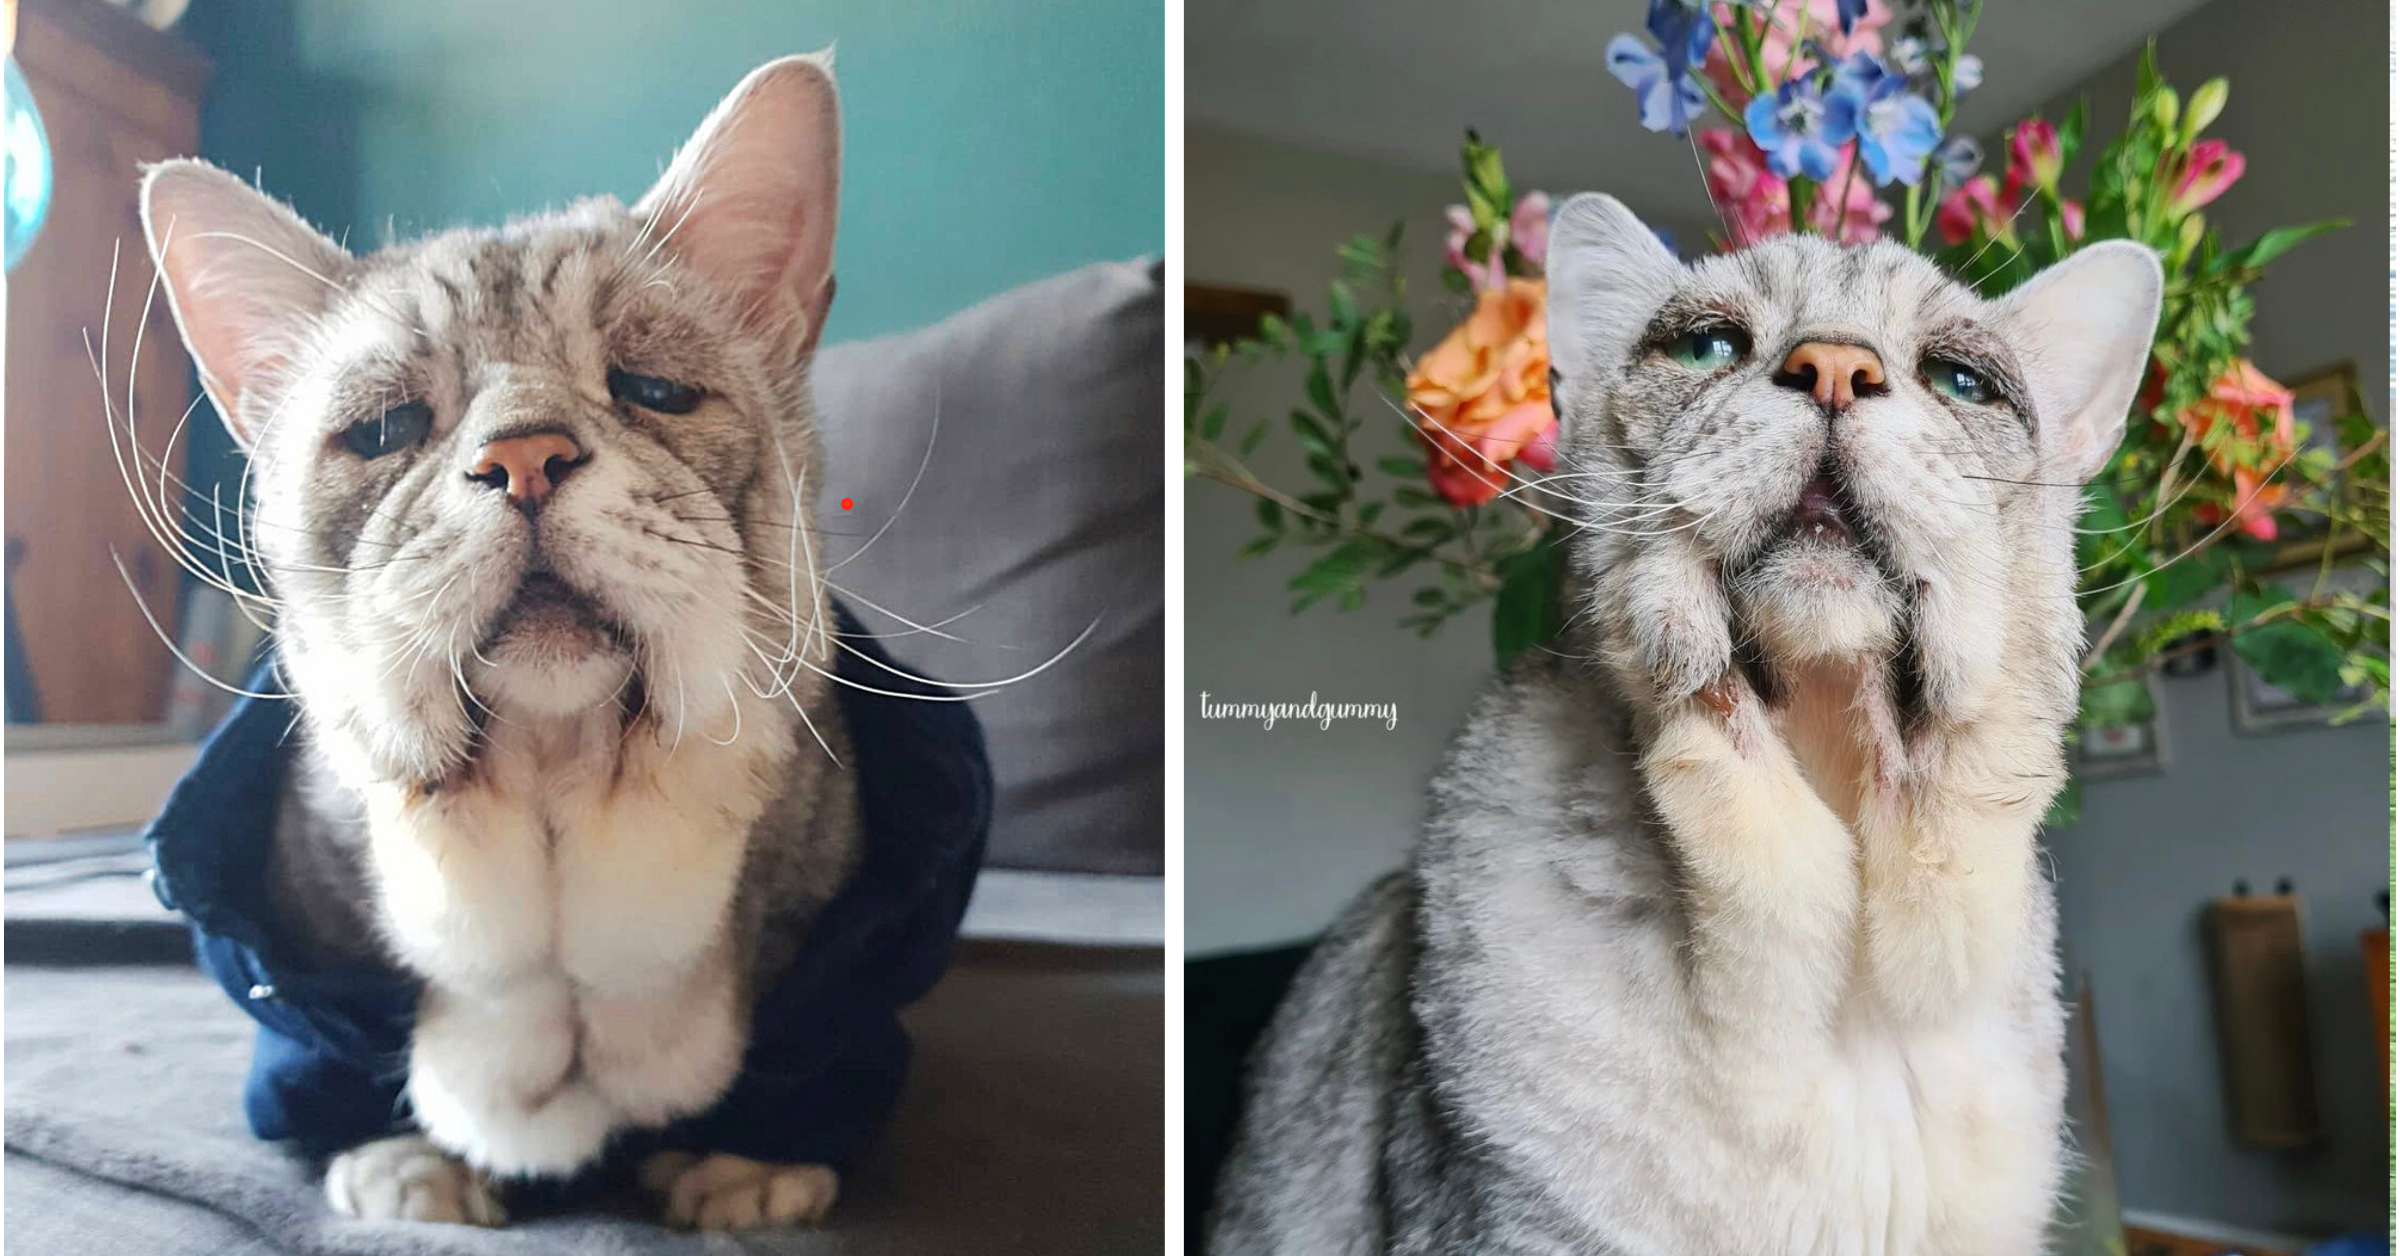 Special Needs Cat with ‘Sad Face’ Shows World That Being Different Is Beautiful